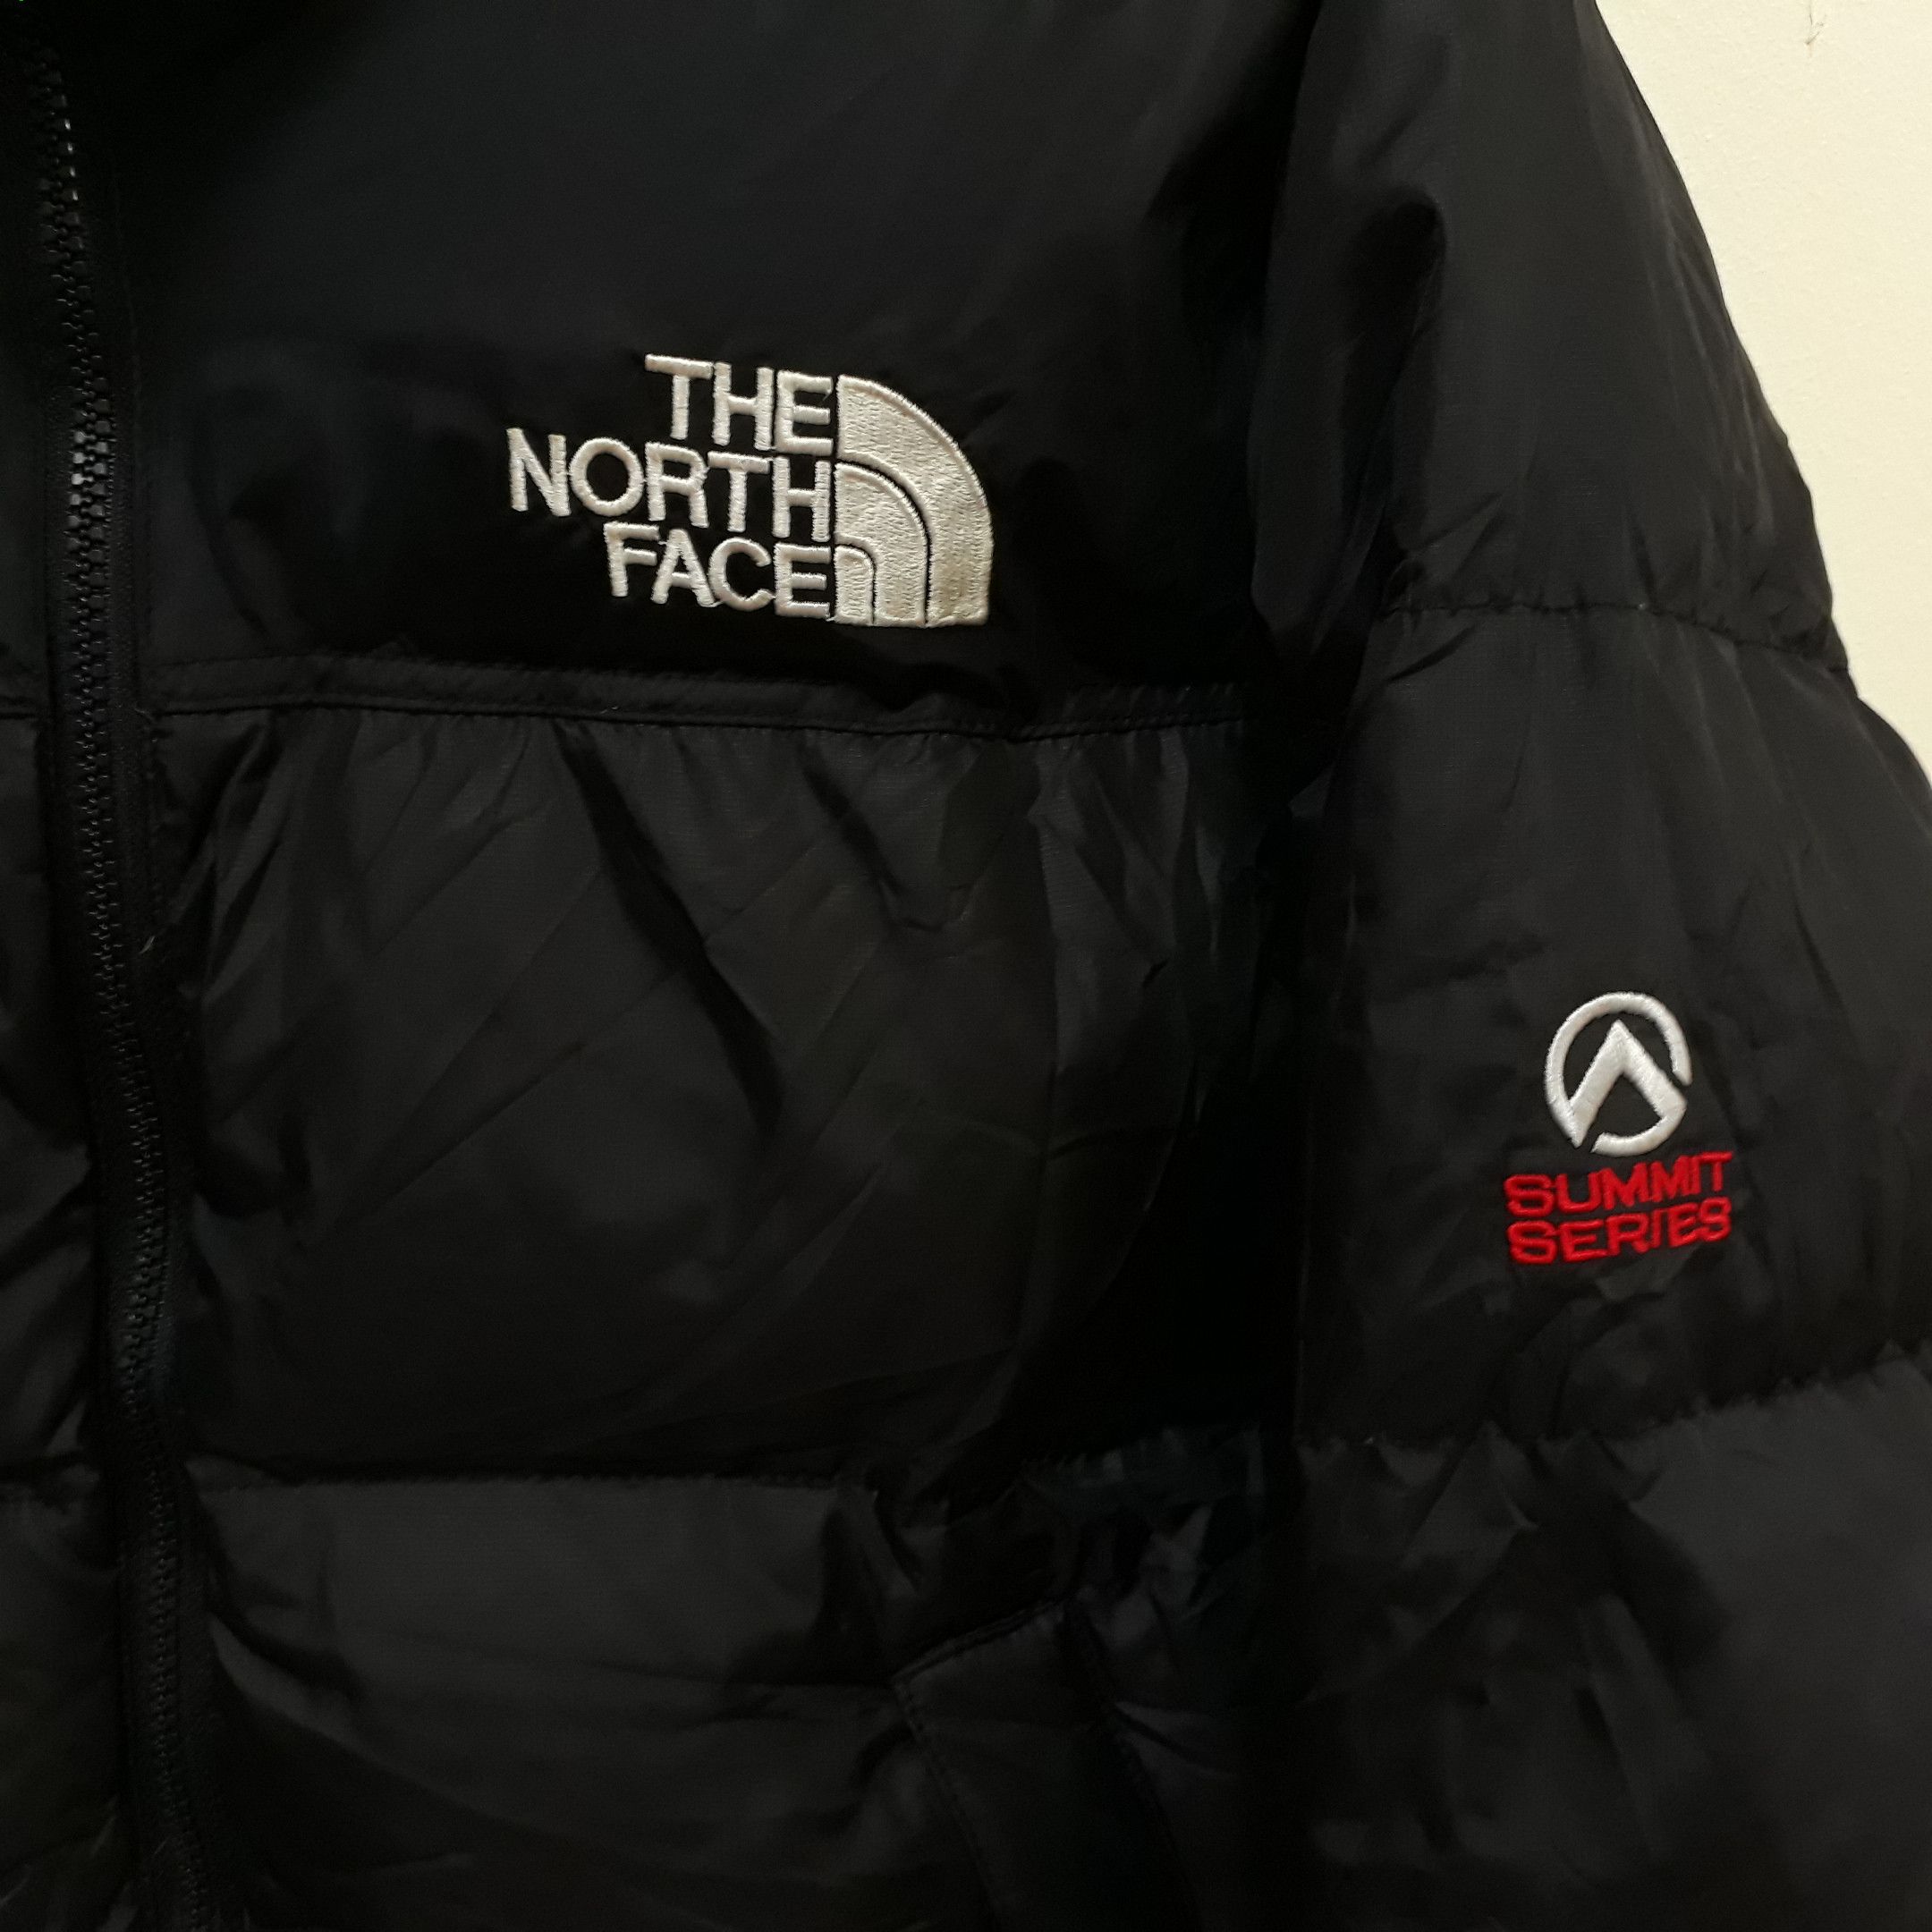 The North Face The North Face Limited Edition Winter 2011 Goose Down Summit Series 850Ltd Puffer Quilted Bomber Jacket Hoodie Size US M / EU 48-50 / 2 - 6 Thumbnail